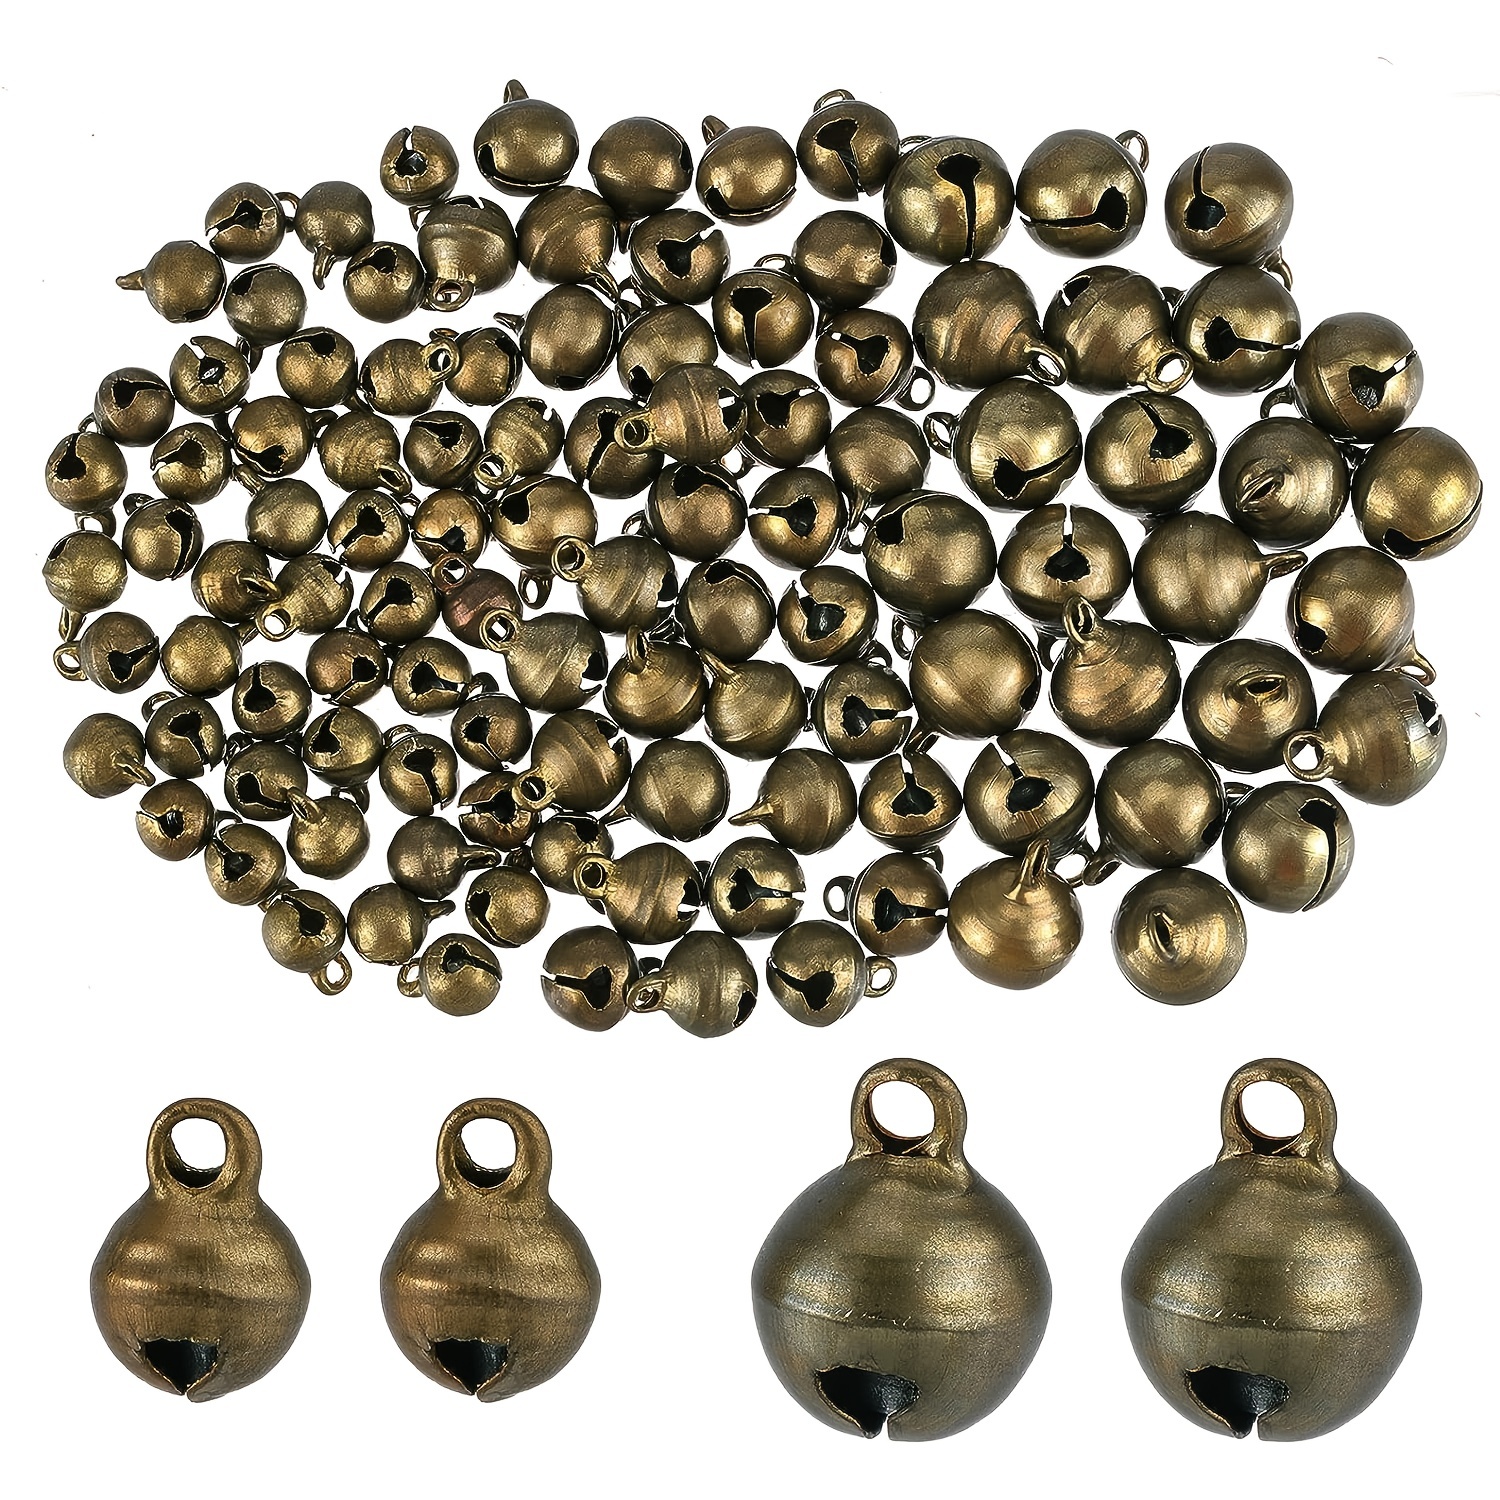 80pcs Mini Jingle Bell Vintage Bronze Small Elliptical Antique Brass Bell  For Crafts And Christmas Halloween Festival Decor,6-10mm